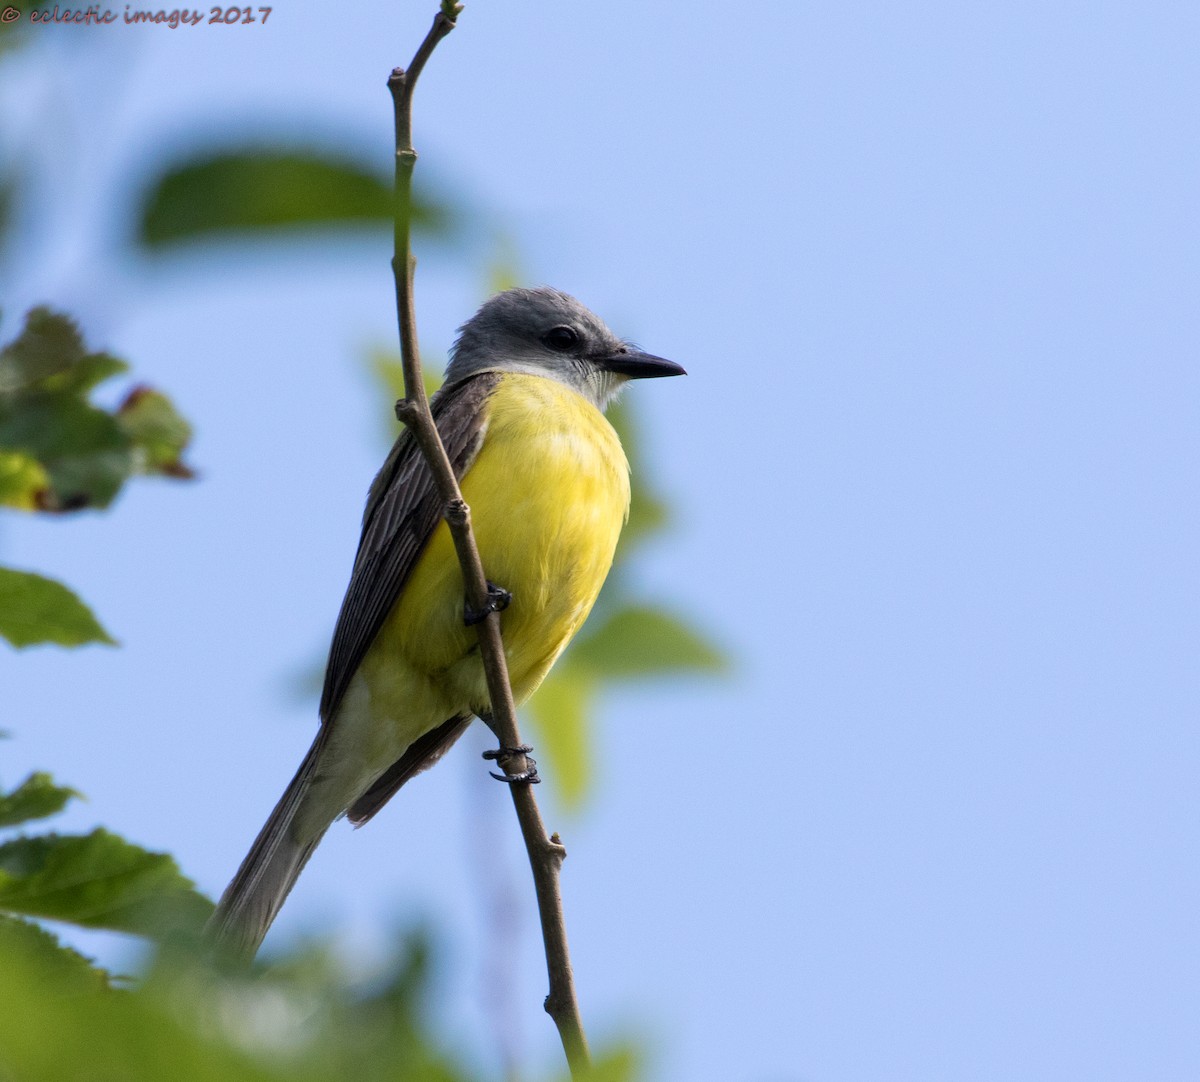 Couch's Kingbird - Janey Woodley